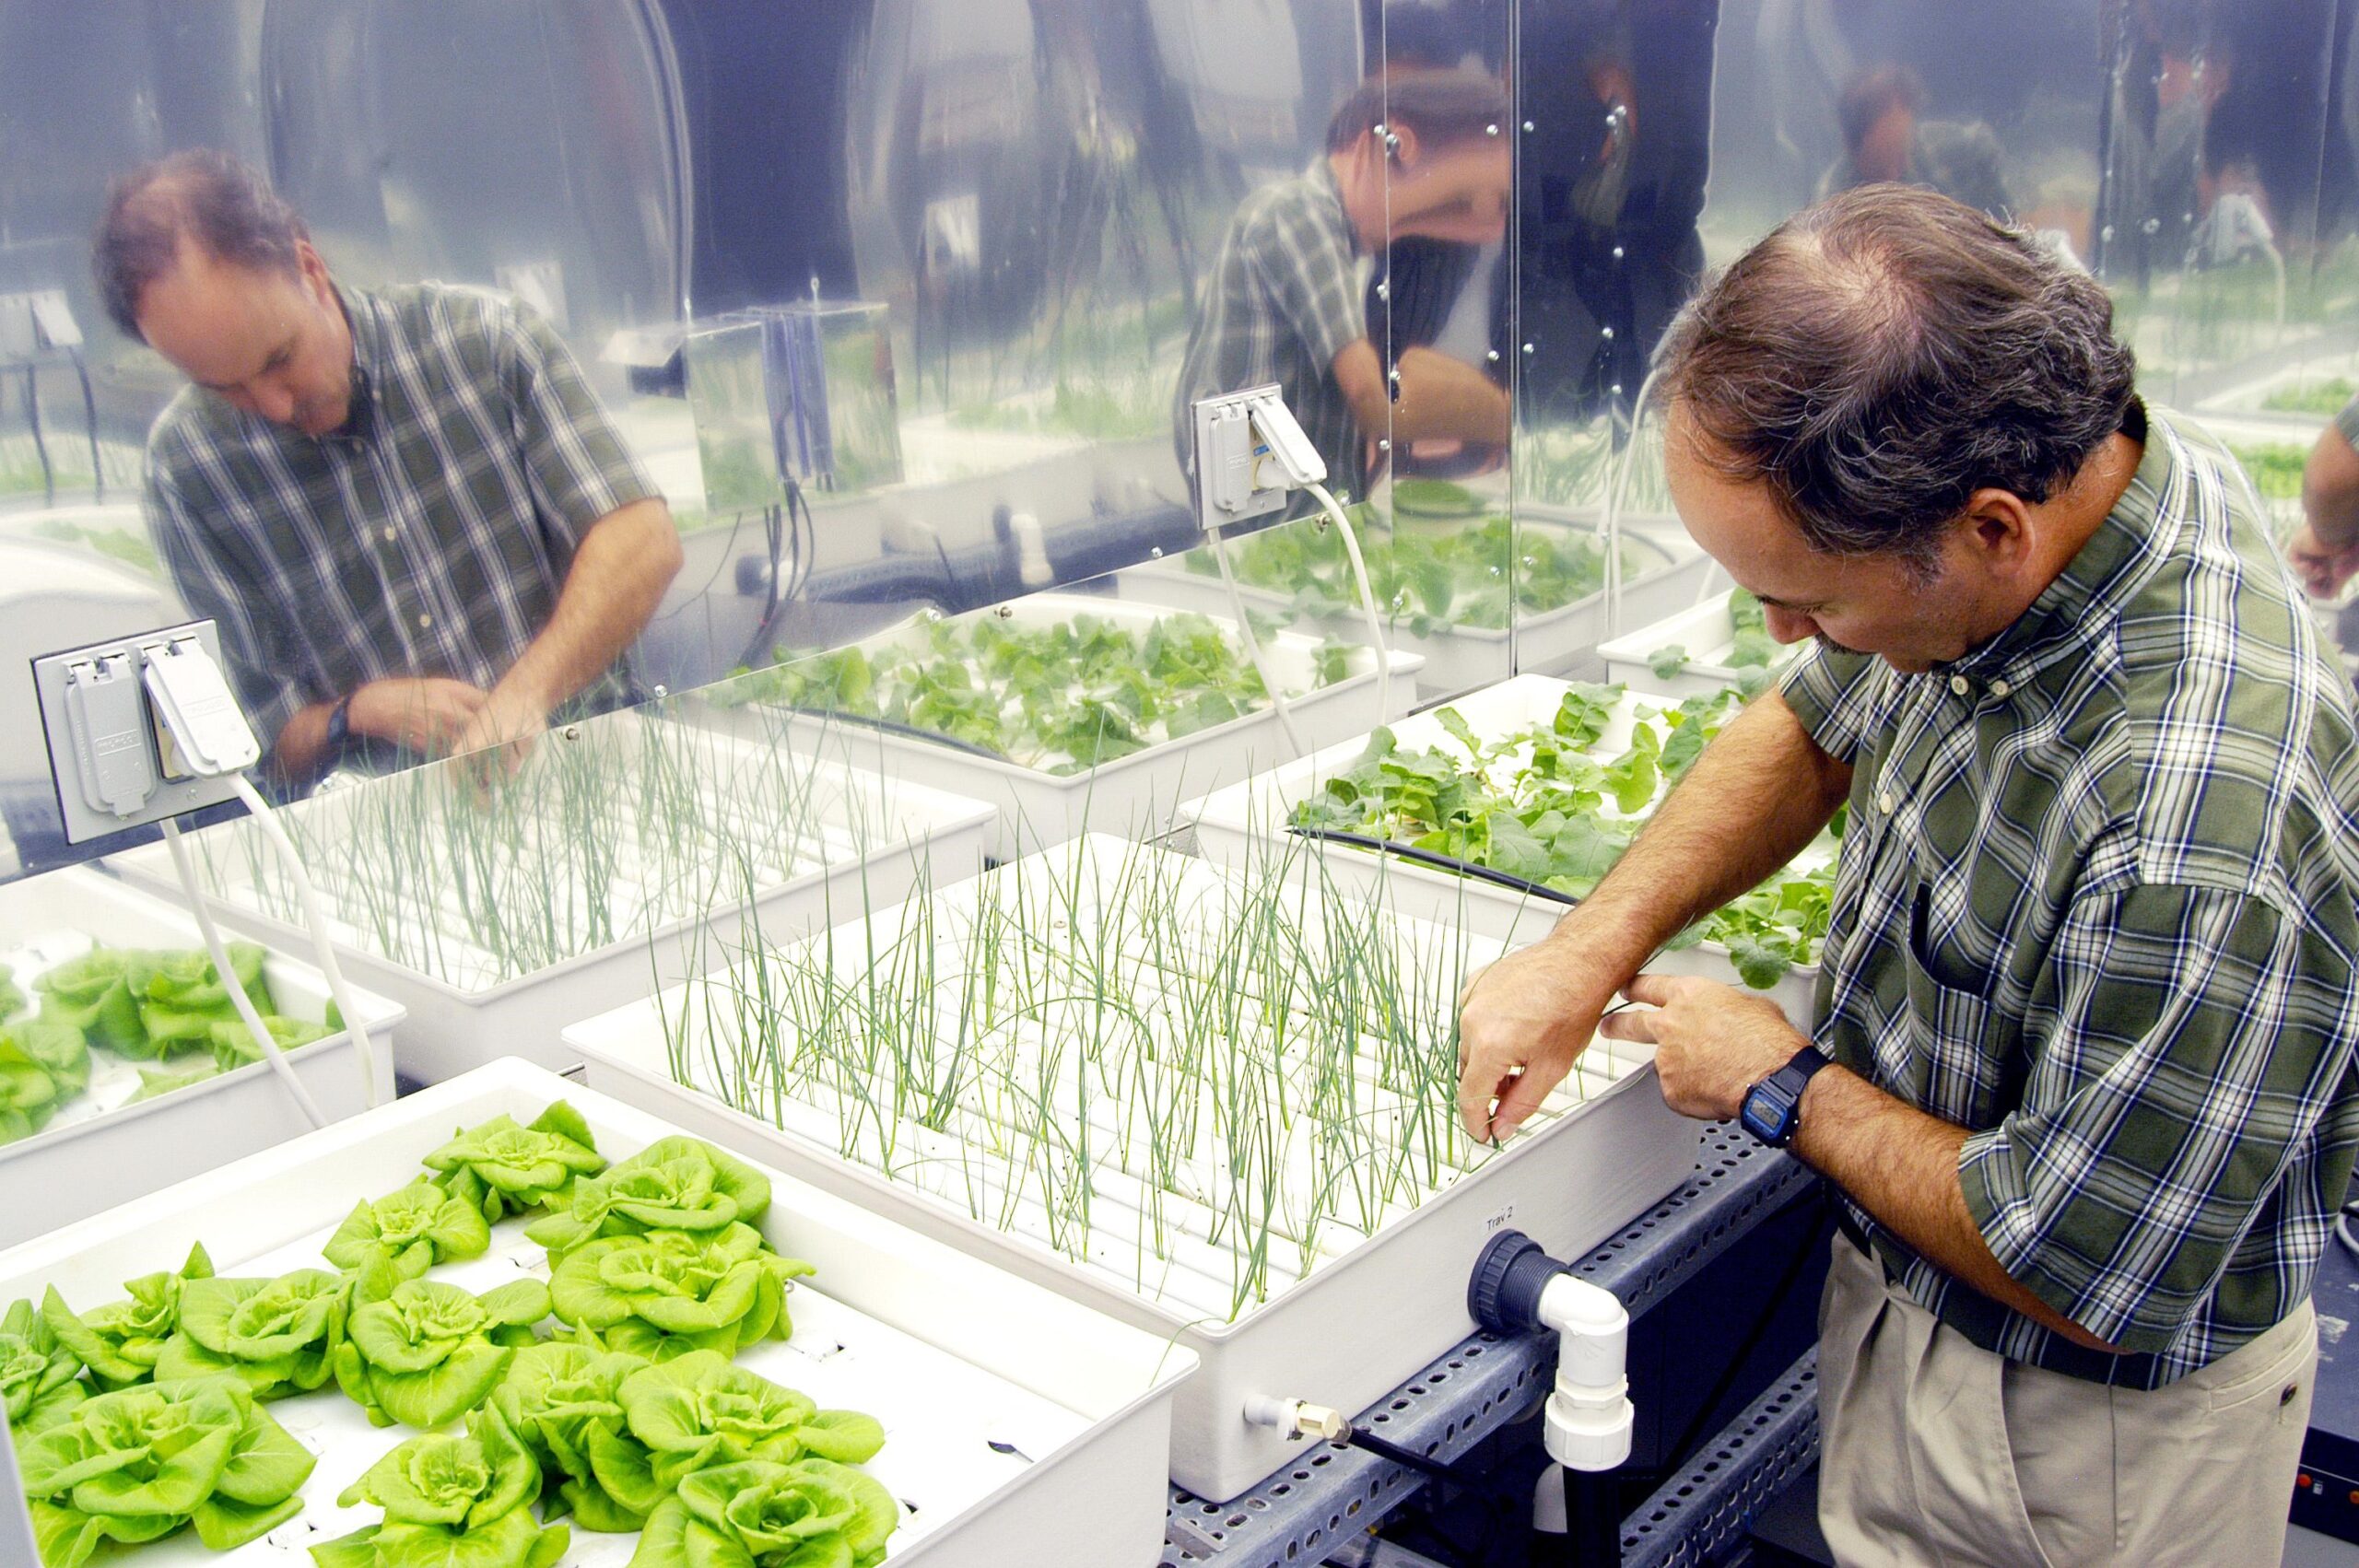 KENNEDY SPACE CENTER, FLA.  -  In a plant growth chamber in the KSC Space Life Sciences Lab,  plant physiologist Ray Wheeler checks onions being grown using hydroponic techniques.  The other plants are Bibb lettuce (left) and radishes (right).  Wheeler and other colleagues are researching plant growth under different types of light, different CO2 concentrations and temperatures.  The Lab is exploring various aspects of a bioregenerative life support system. Such research and technology development will be crucial to long-term habitation of space by humans.